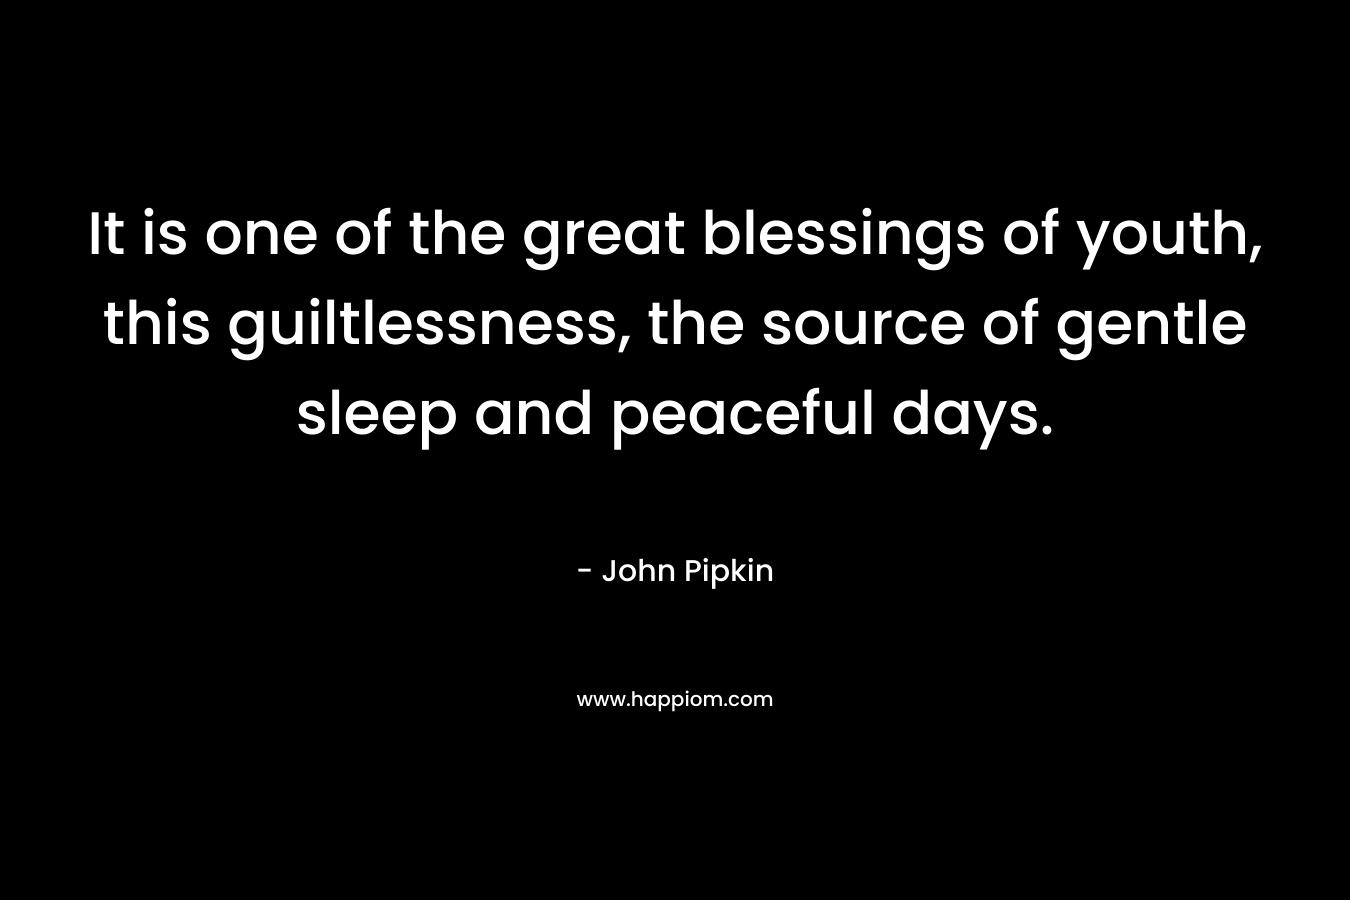 It is one of the great blessings of youth, this guiltlessness, the source of gentle sleep and peaceful days. – John Pipkin